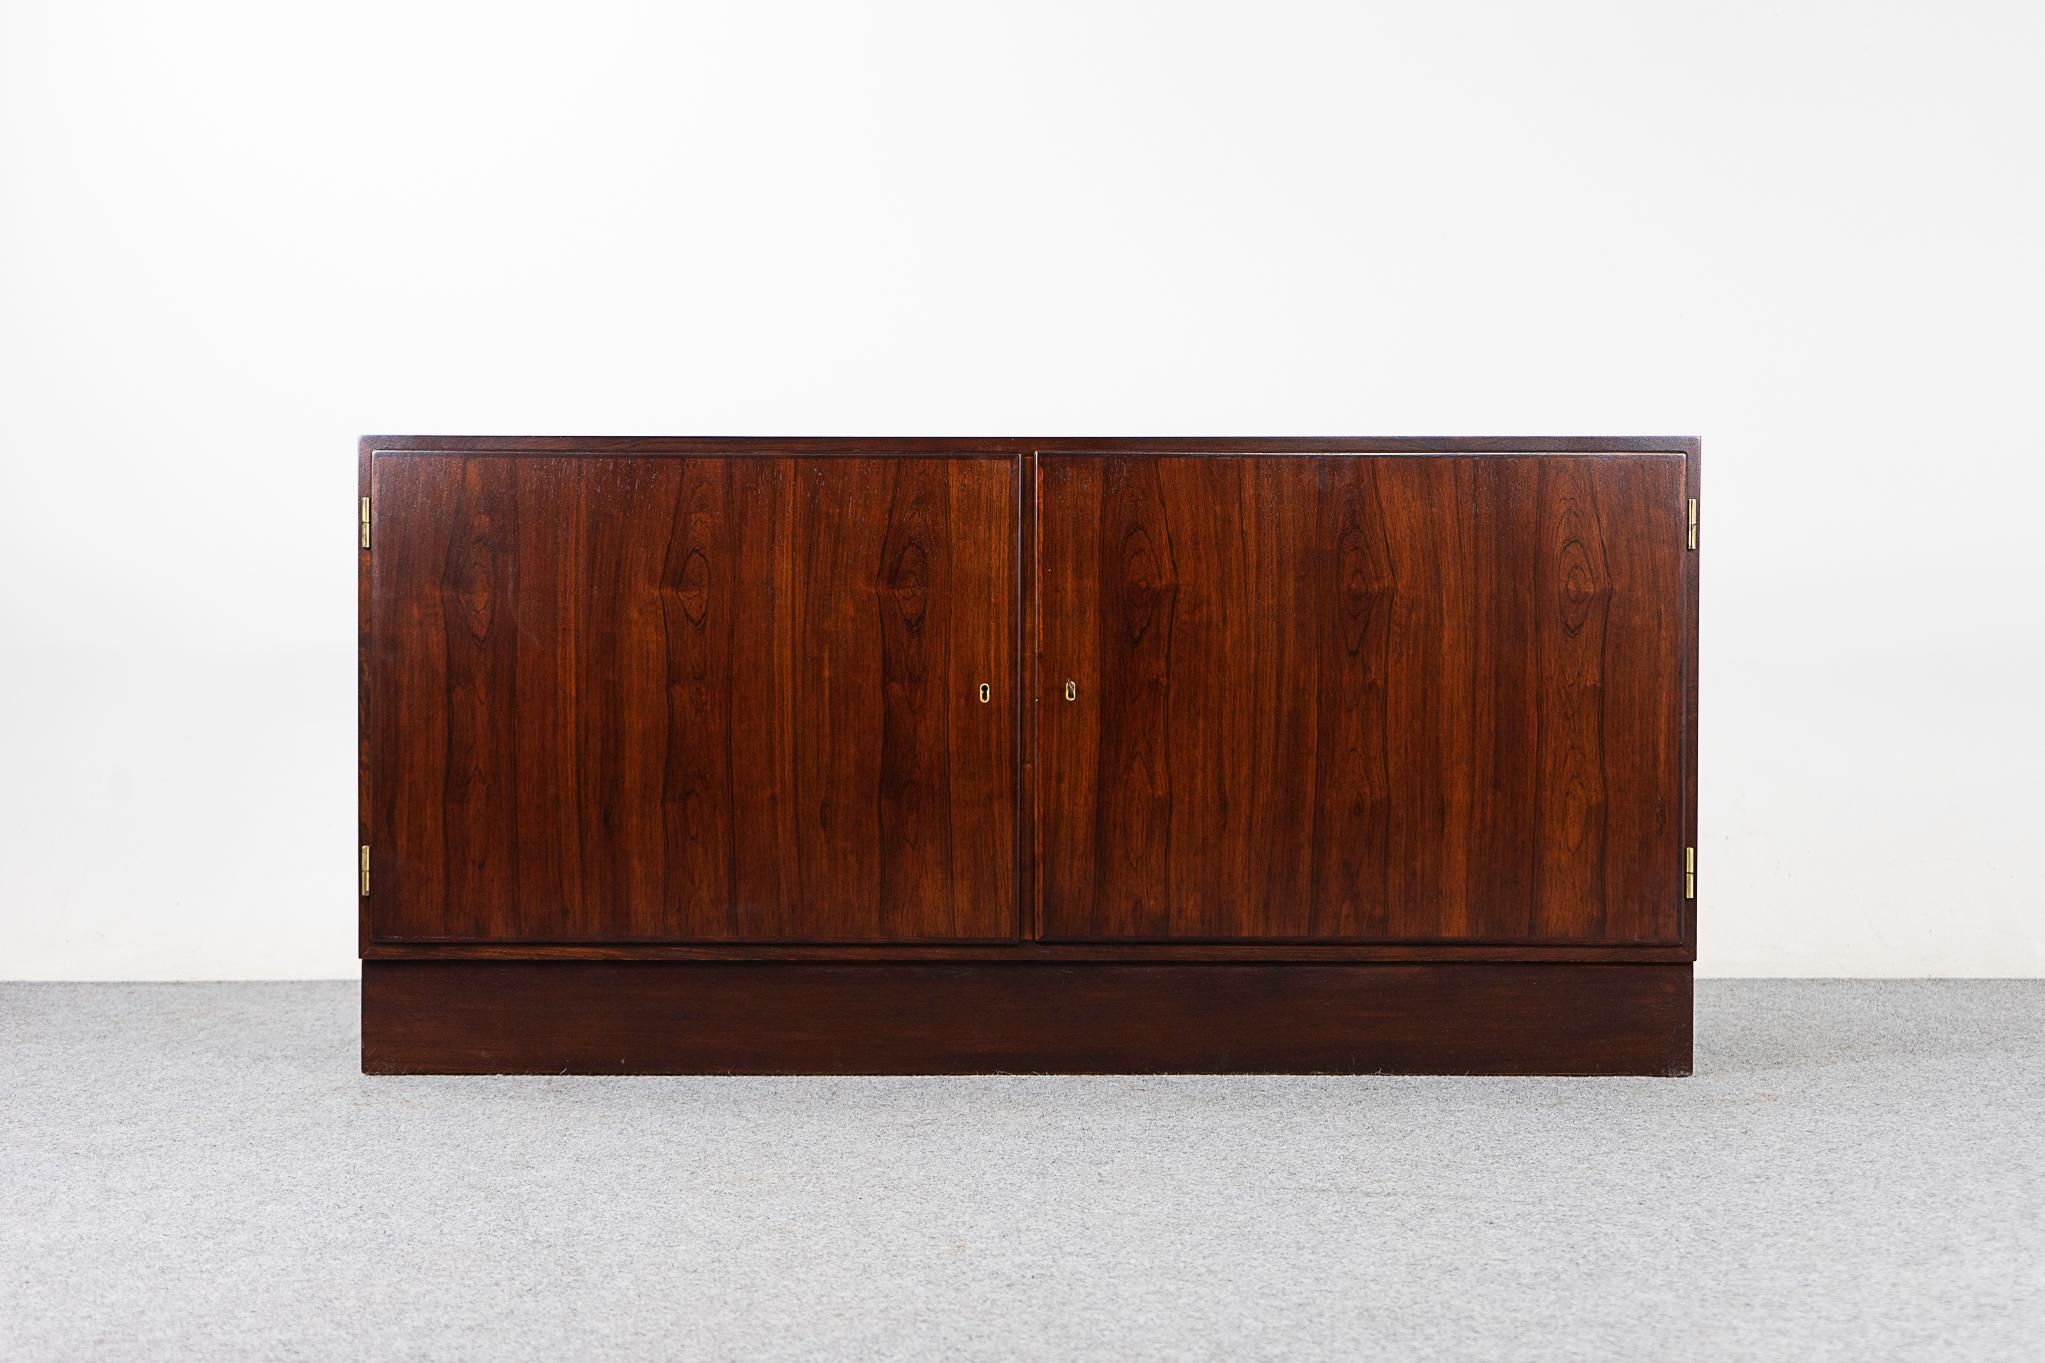 Rosewood midcentury sideboard by Hundevad, circa 1960s. Clean, simple lined design and exceptional book-matched veneer throughout. 2 Adjustable shelves on one side, open cubby on the other. Danish Furniture Makers' Control stamp intact.

Please